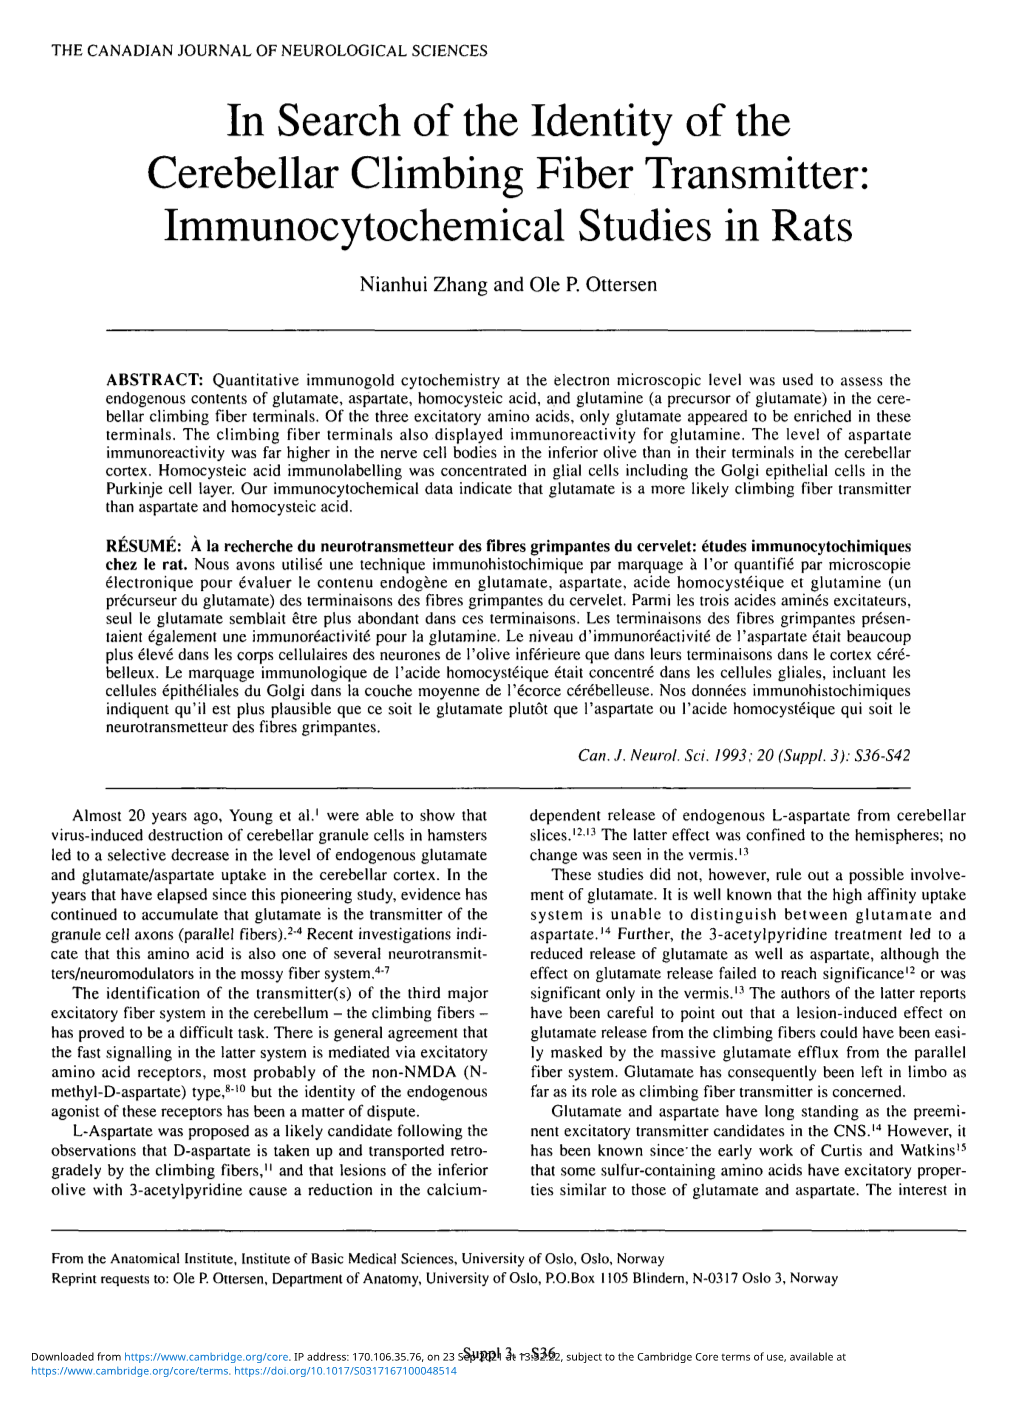 In Search of the Identity of the Cerebellar Climbing Fiber Transmitter: Immunocytochemical Studies in Rats